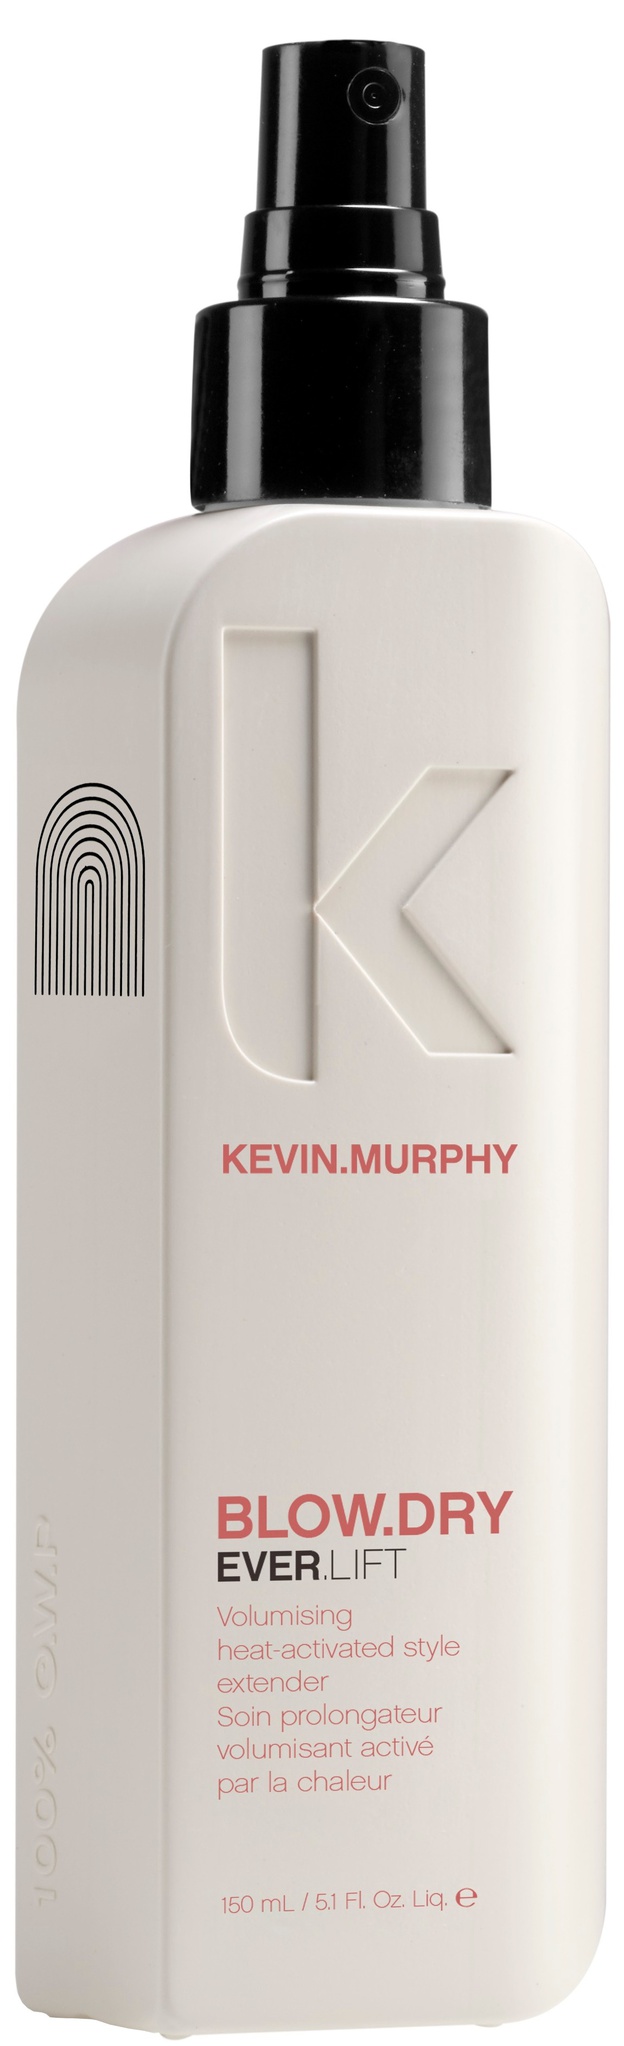 Kevin Murphy Blow.dry Ever.lift